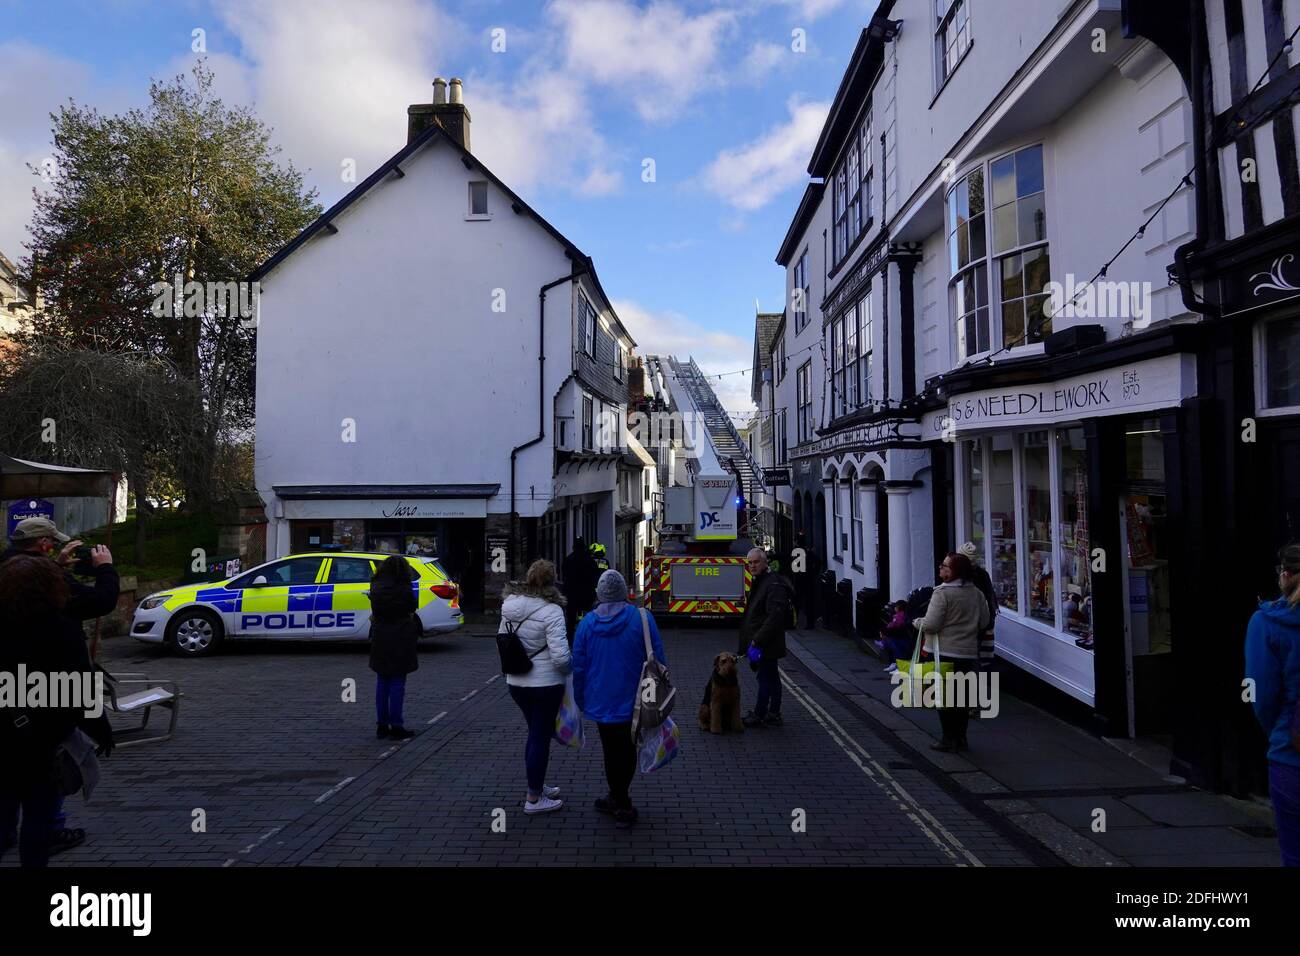 Totnes, UK. 5th Dec, 2020. Fire service platform ladder blocks the high street as it removes lead flashing from a house, which was in danger of falling onto pedestrians. Credit: Julian Kemp/Alamy Live News Stock Photo